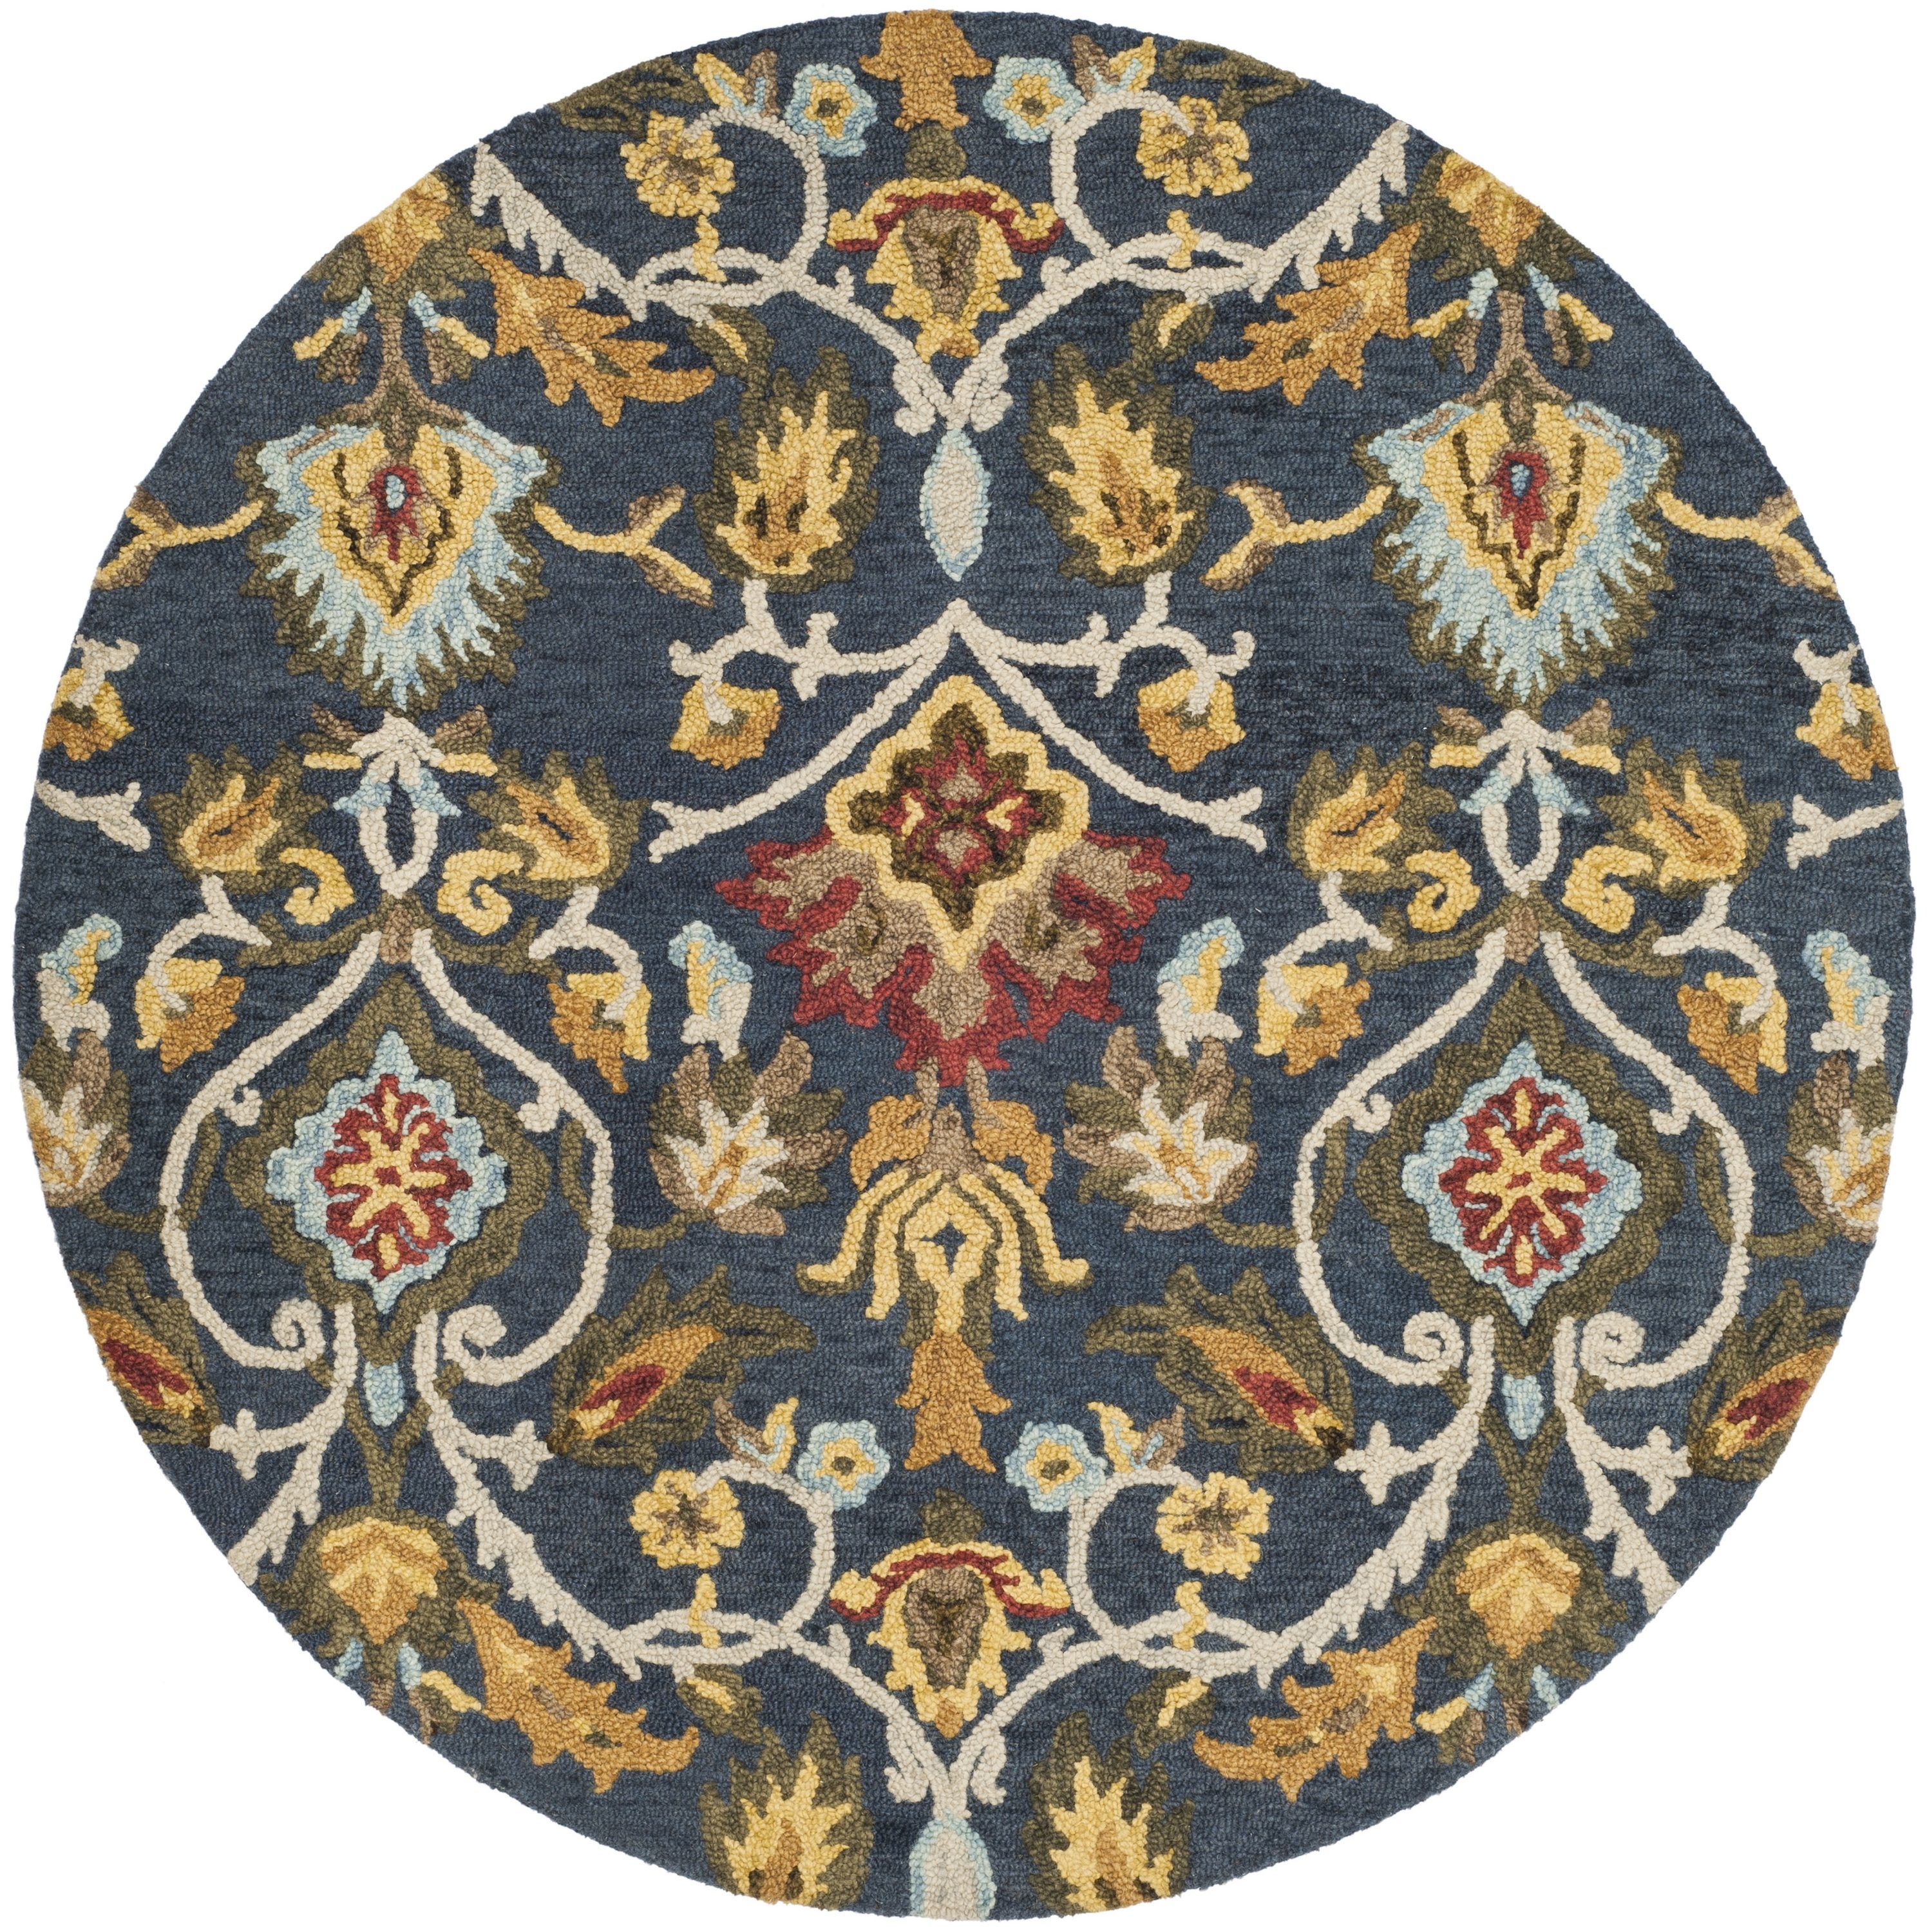 Safavieh 6 X 6 Wool Navy Round Indoor Floral/Botanical Bohemian/Eclectic  Area Rug In The Rugs Department At Lowes Inside Blossom Oval Rugs (View 6 of 15)